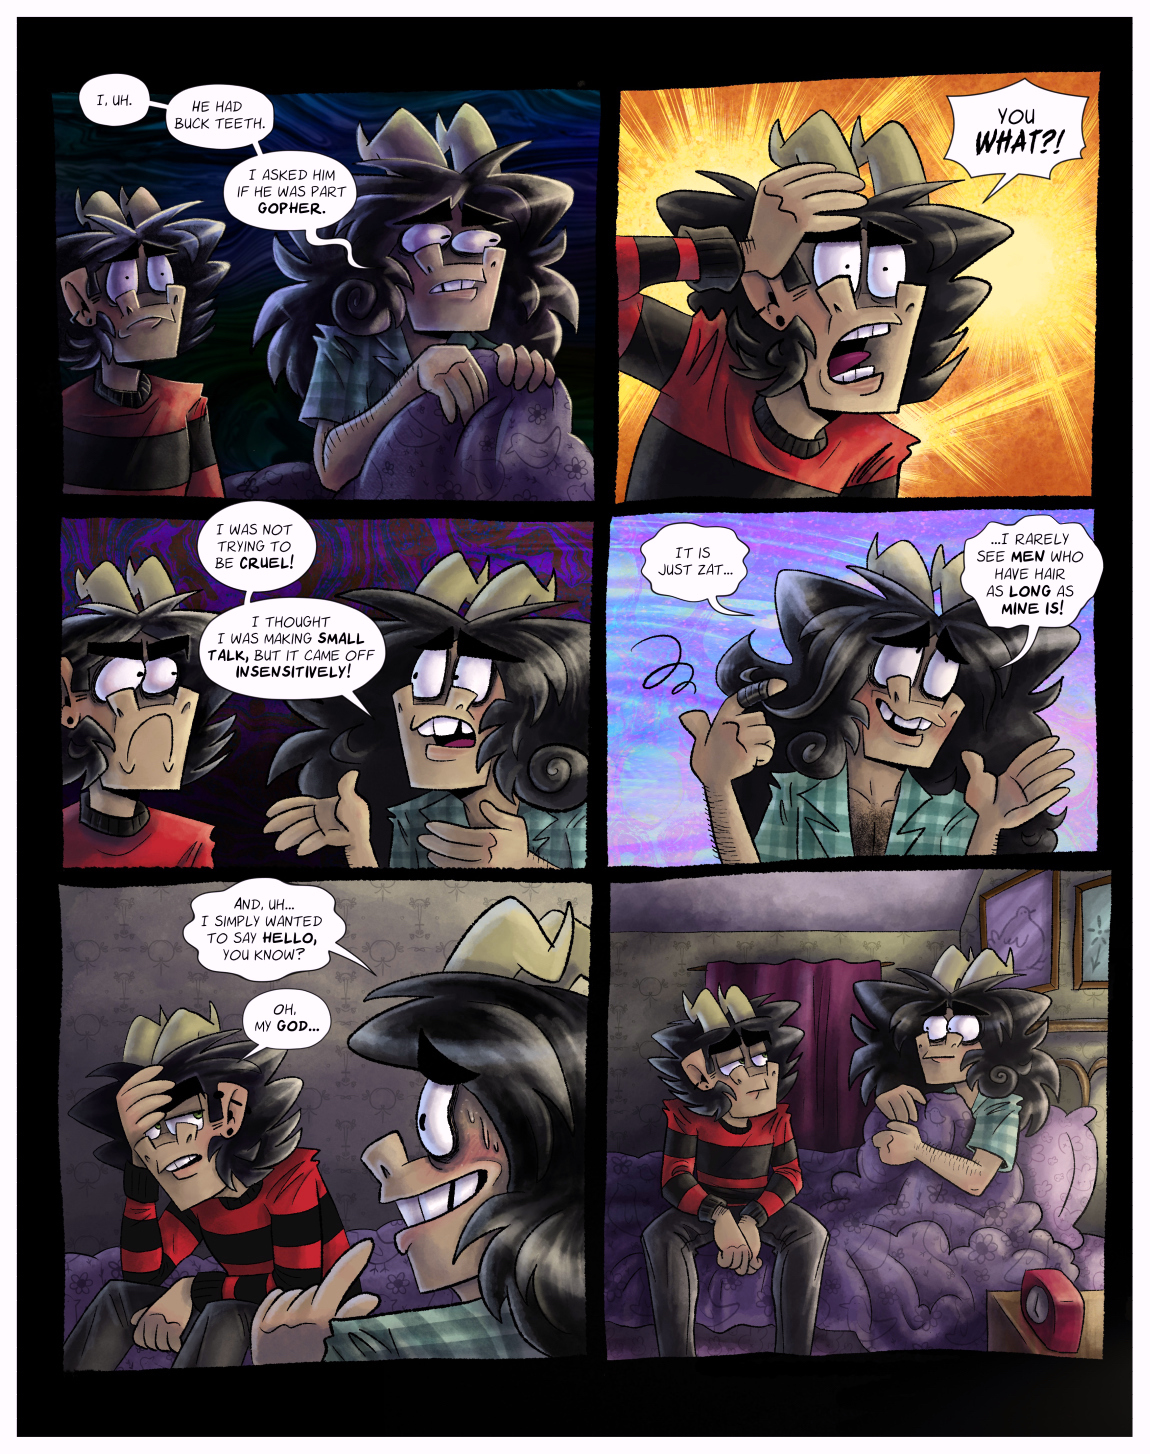 Ch 2 Pg 37: You WHAT?